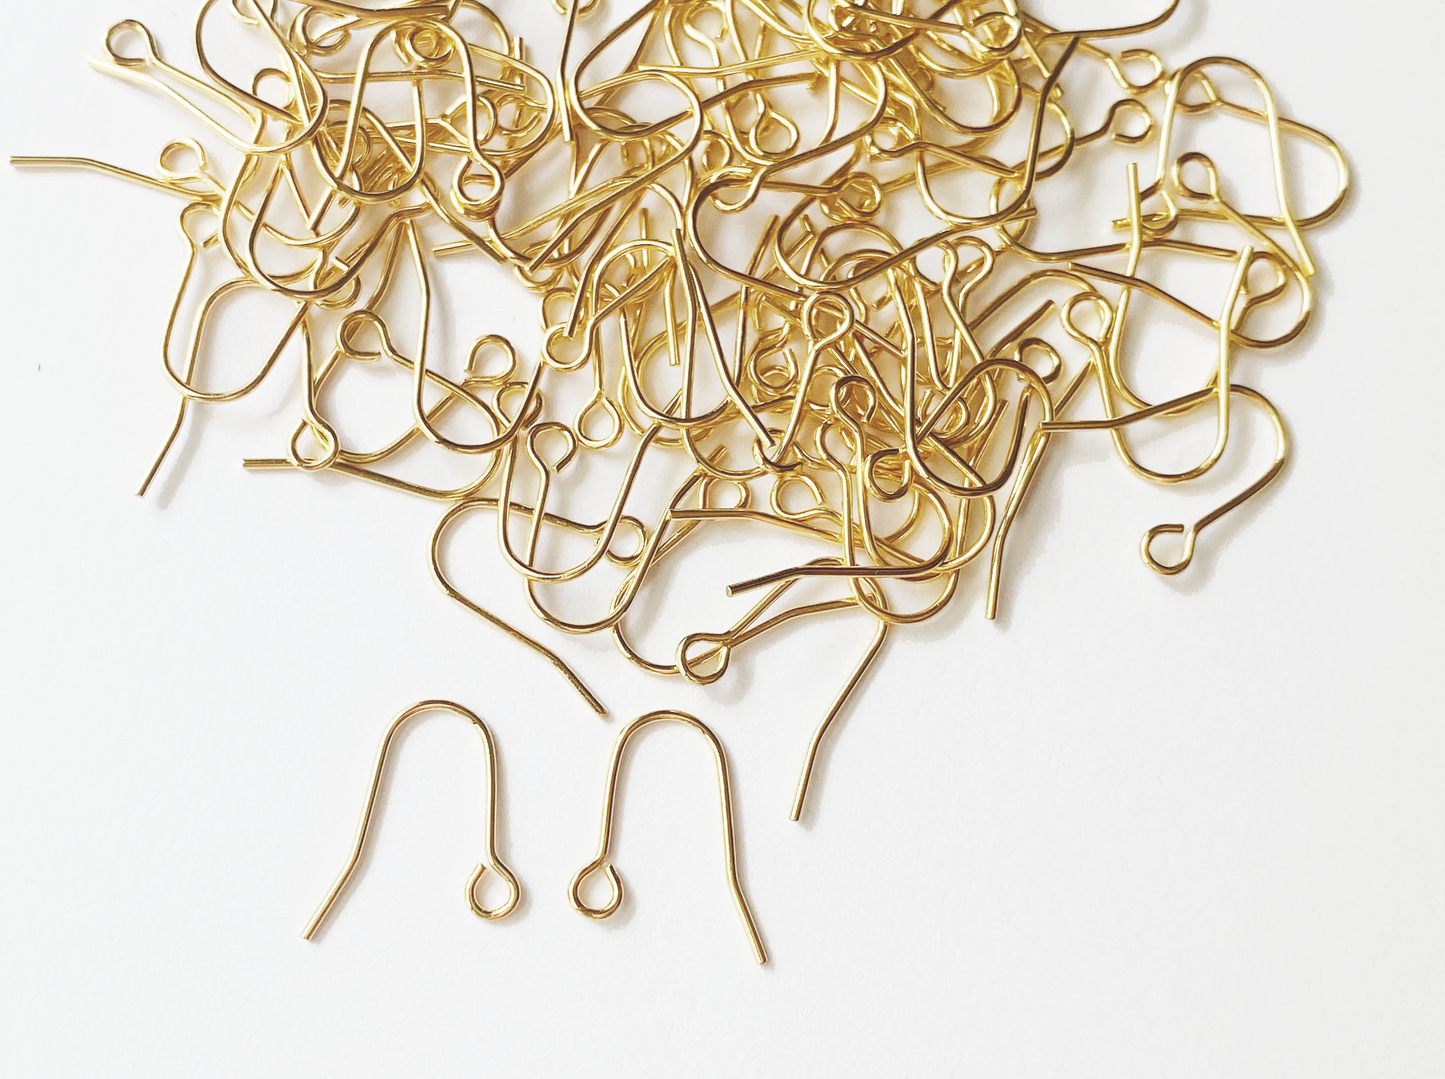 13mm Small Gold-Plated Stainless Steel Ear Wire, 22 gauge Earring Hooks